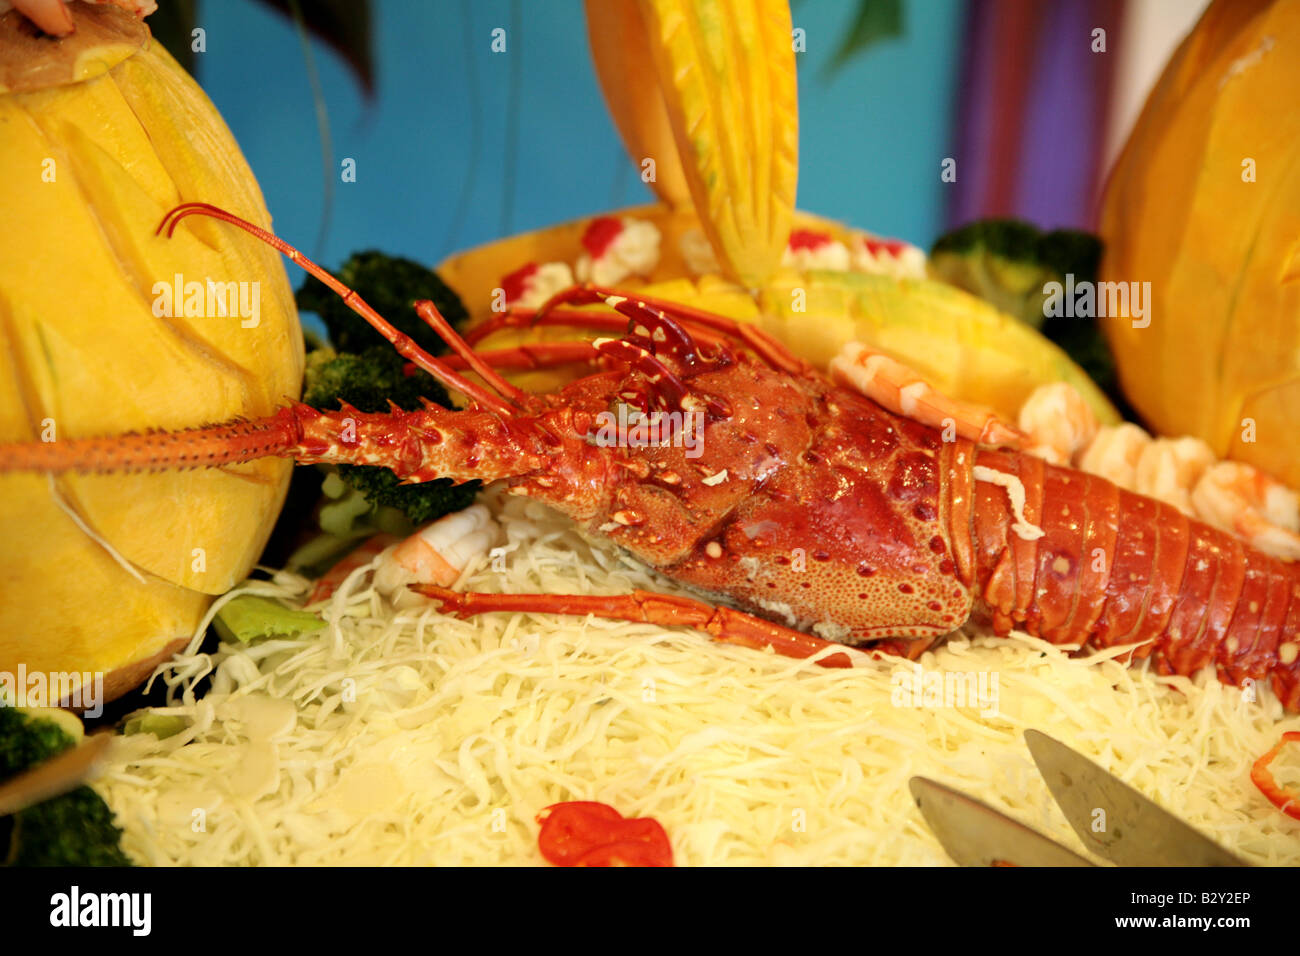 Red lobster used for decoration in a buffet table in a restaurant Stock Photo